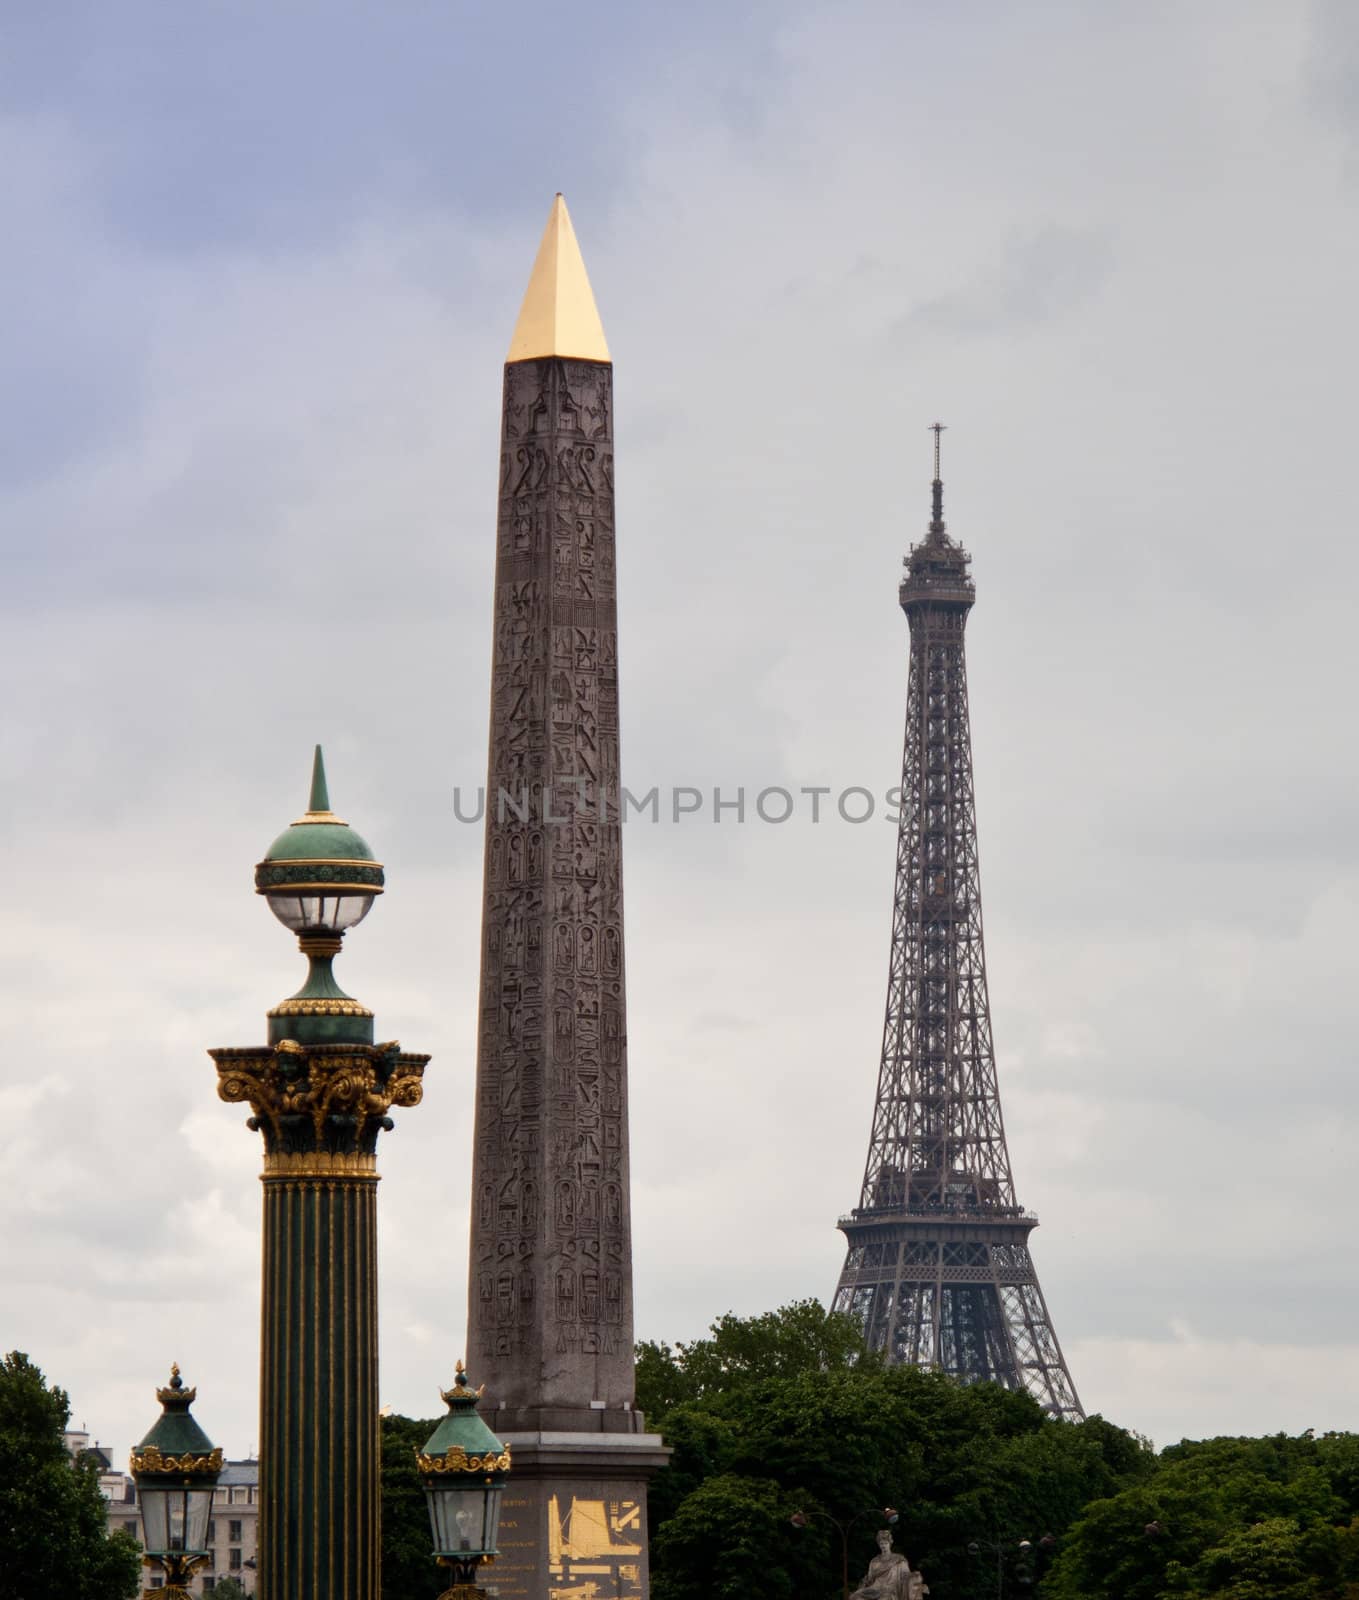 Paris cityscape with Cleopatra's needle obelisk and Eiffel Tower